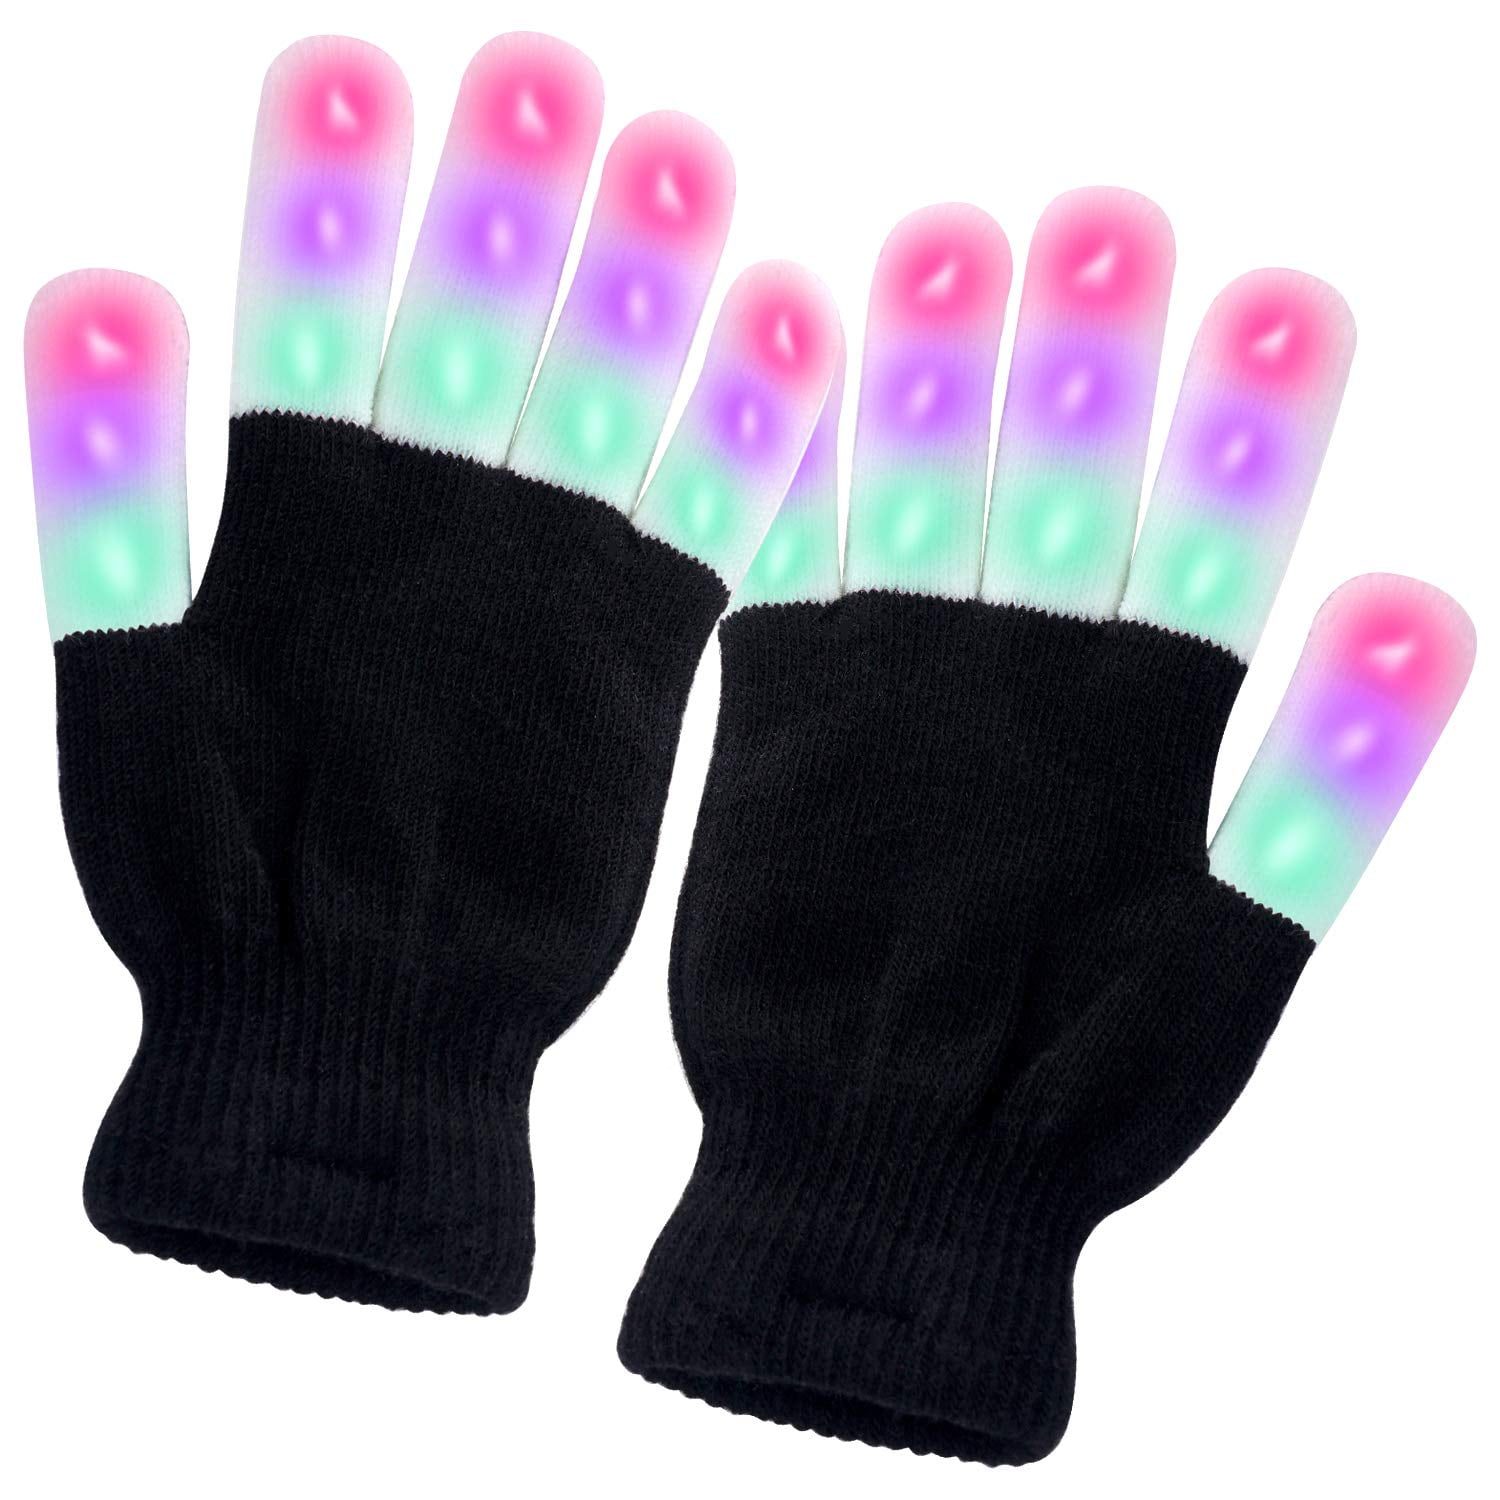 XO Magic Mitts HALLOWEEN LED Gloves Multicolor Party Light Up Rave Dance FUN! 